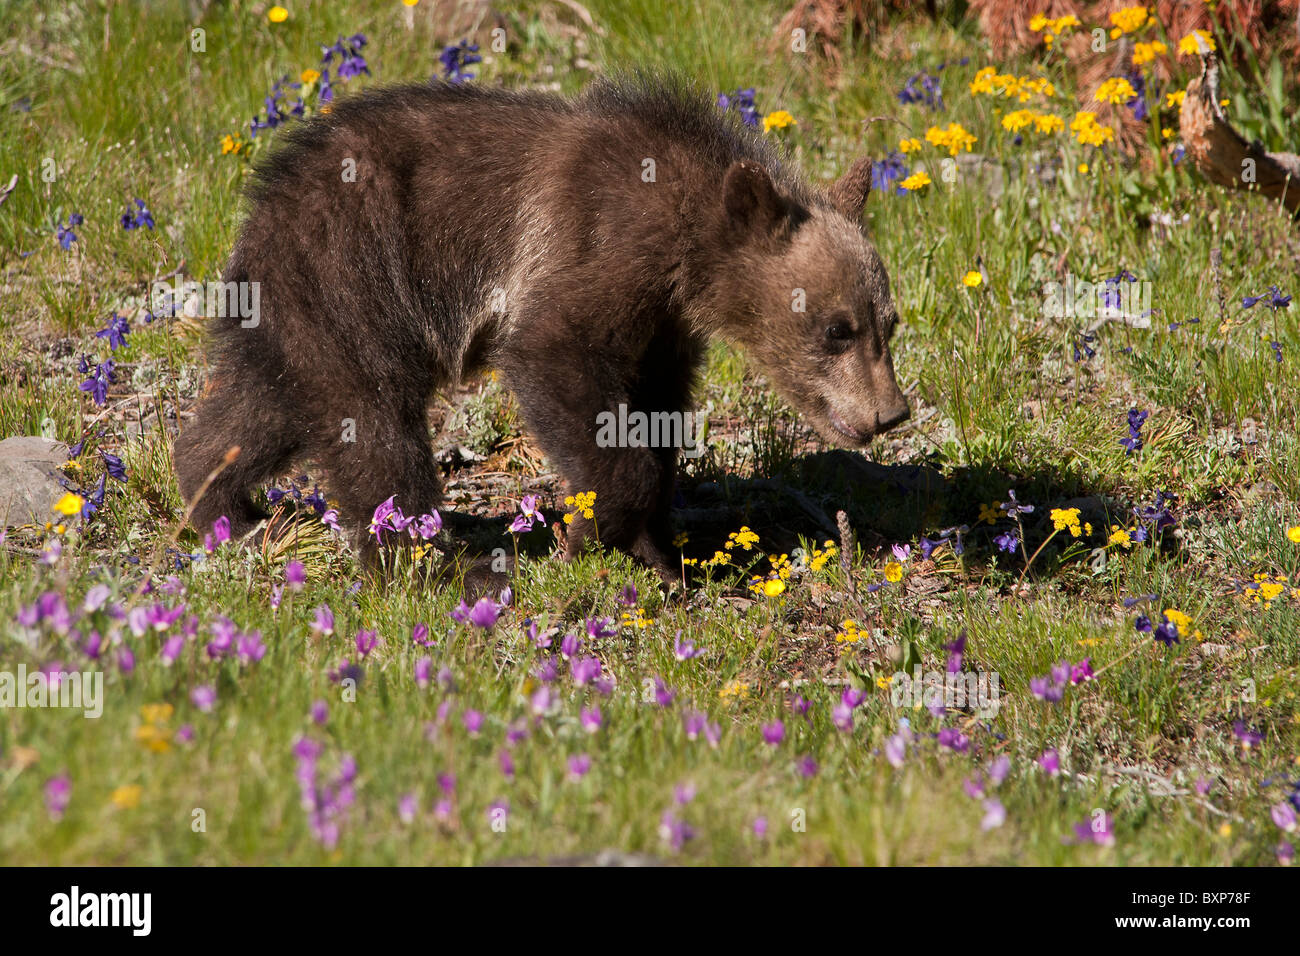 Stock photo of a grizzly bear cub walking through a meadow of flowers, Yellowstone National Park. Stock Photo